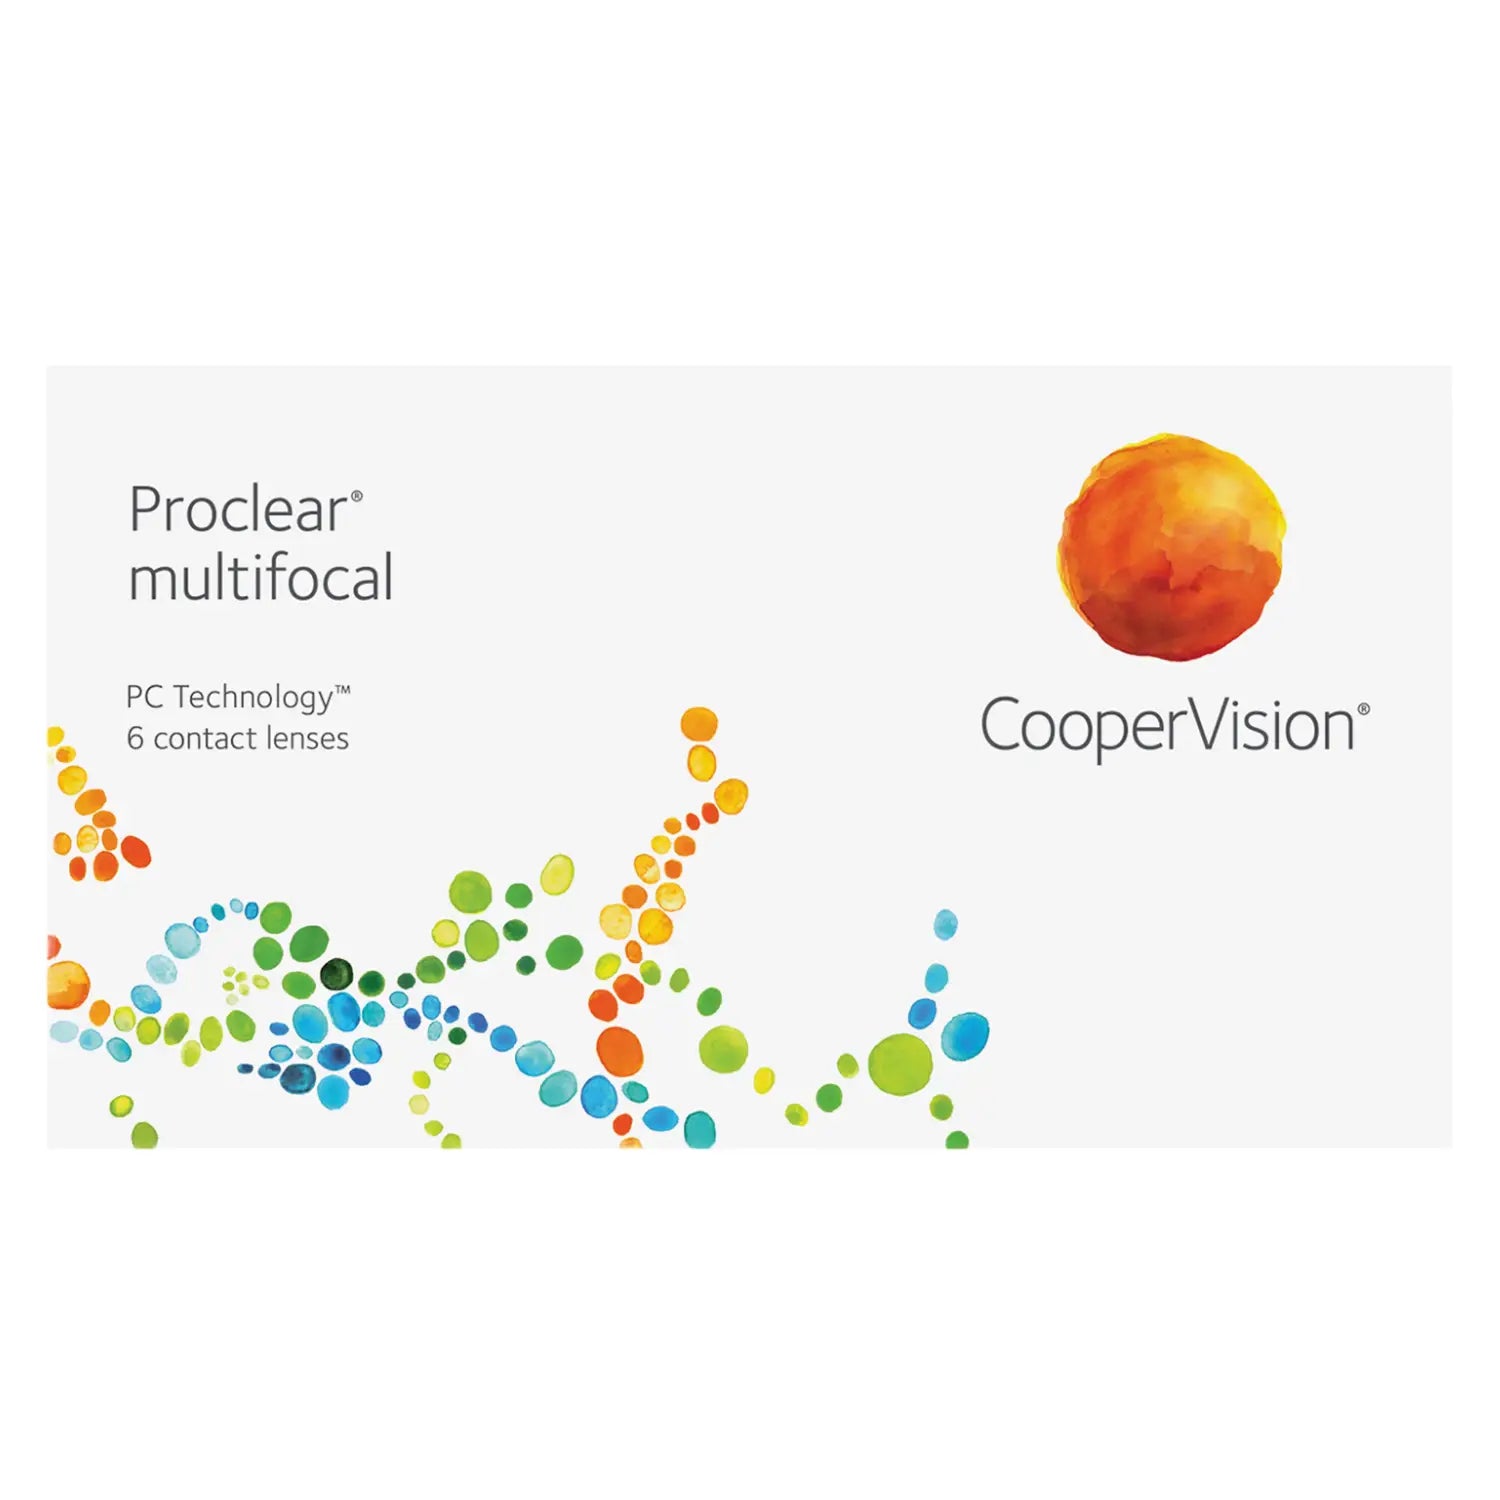 Proclear contact lenses